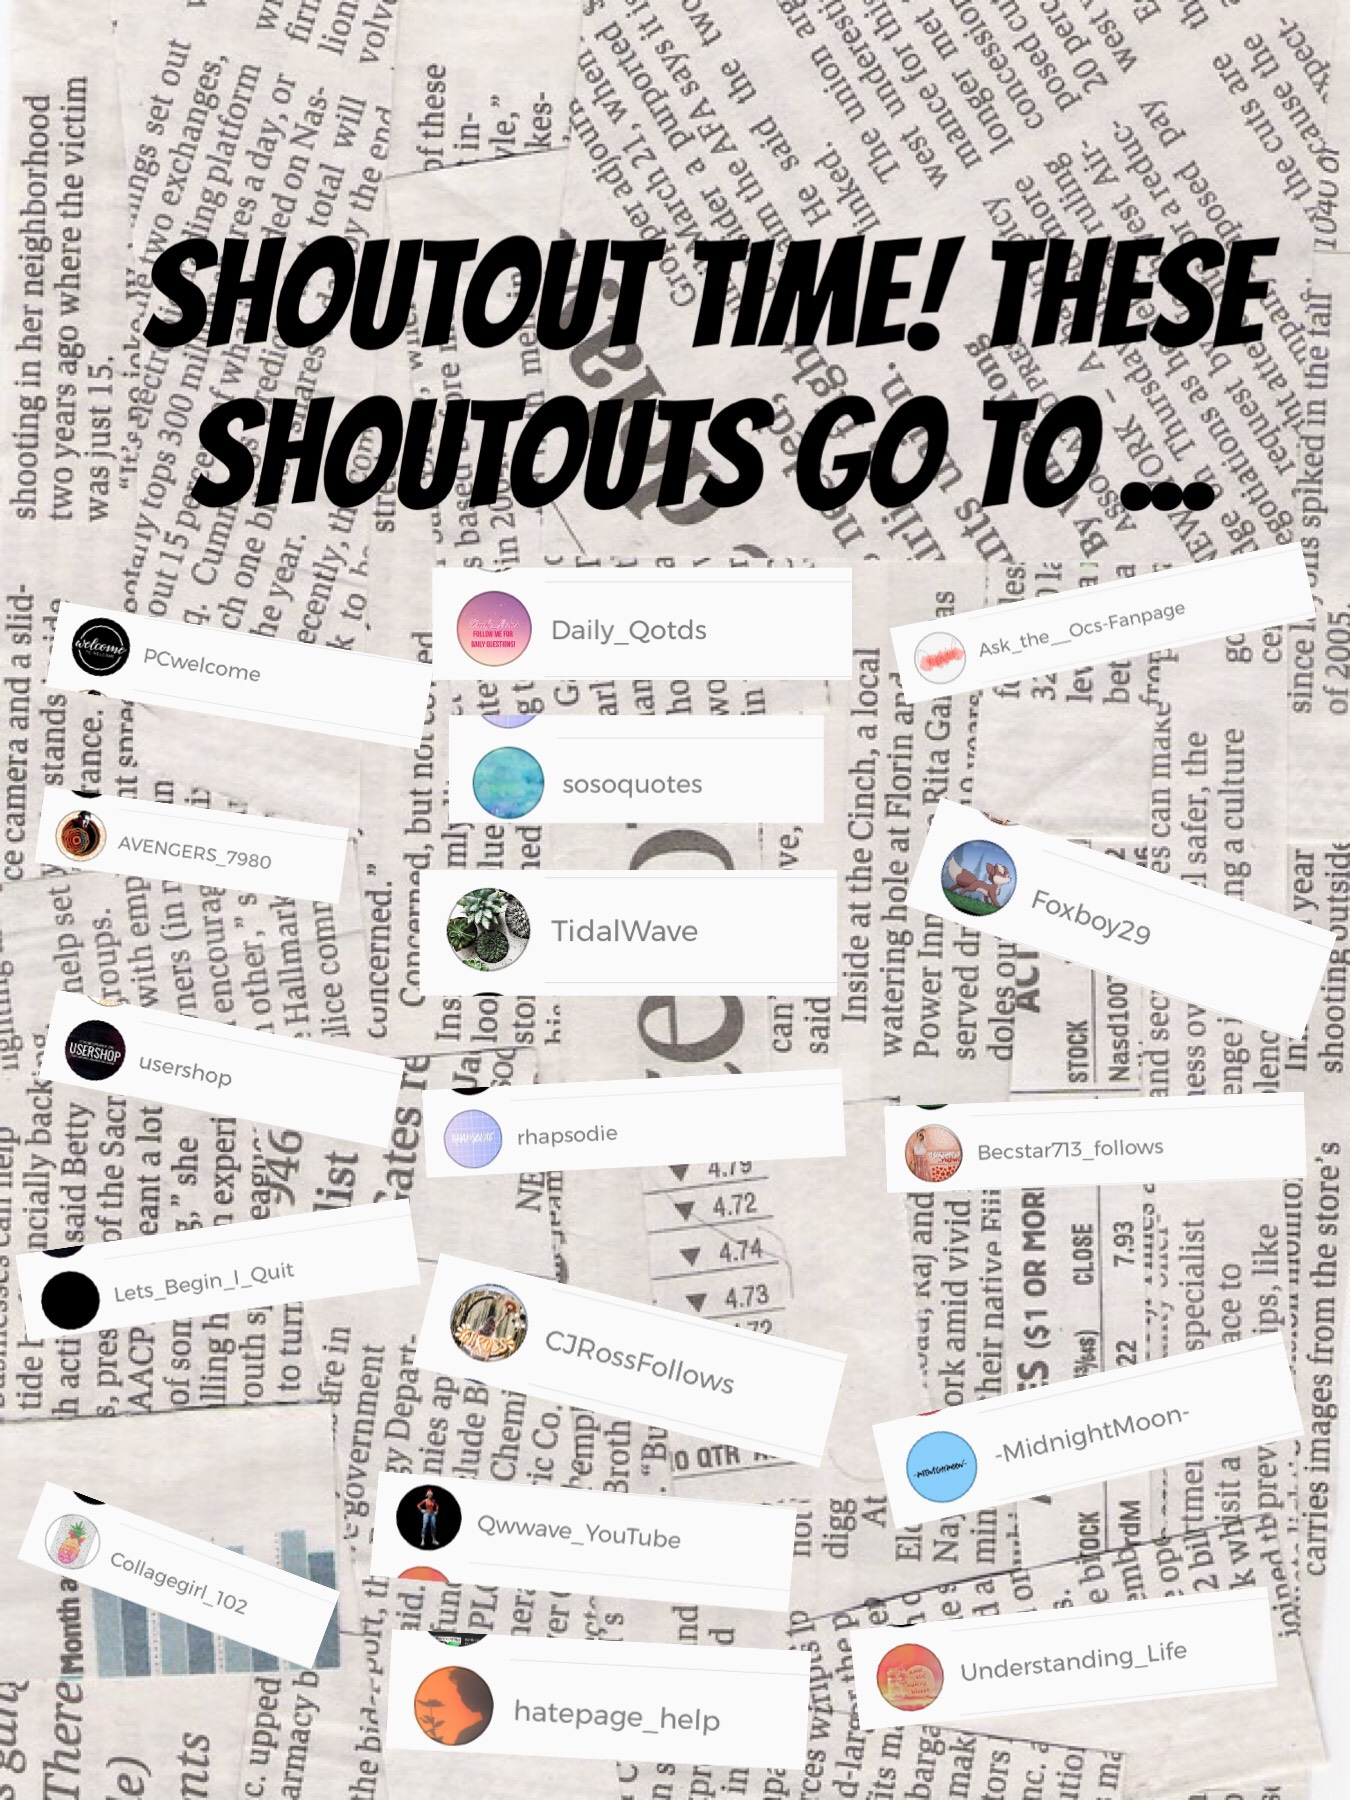 Massive shoutouts to these amazing people! For a shoutout comment below or follow me!